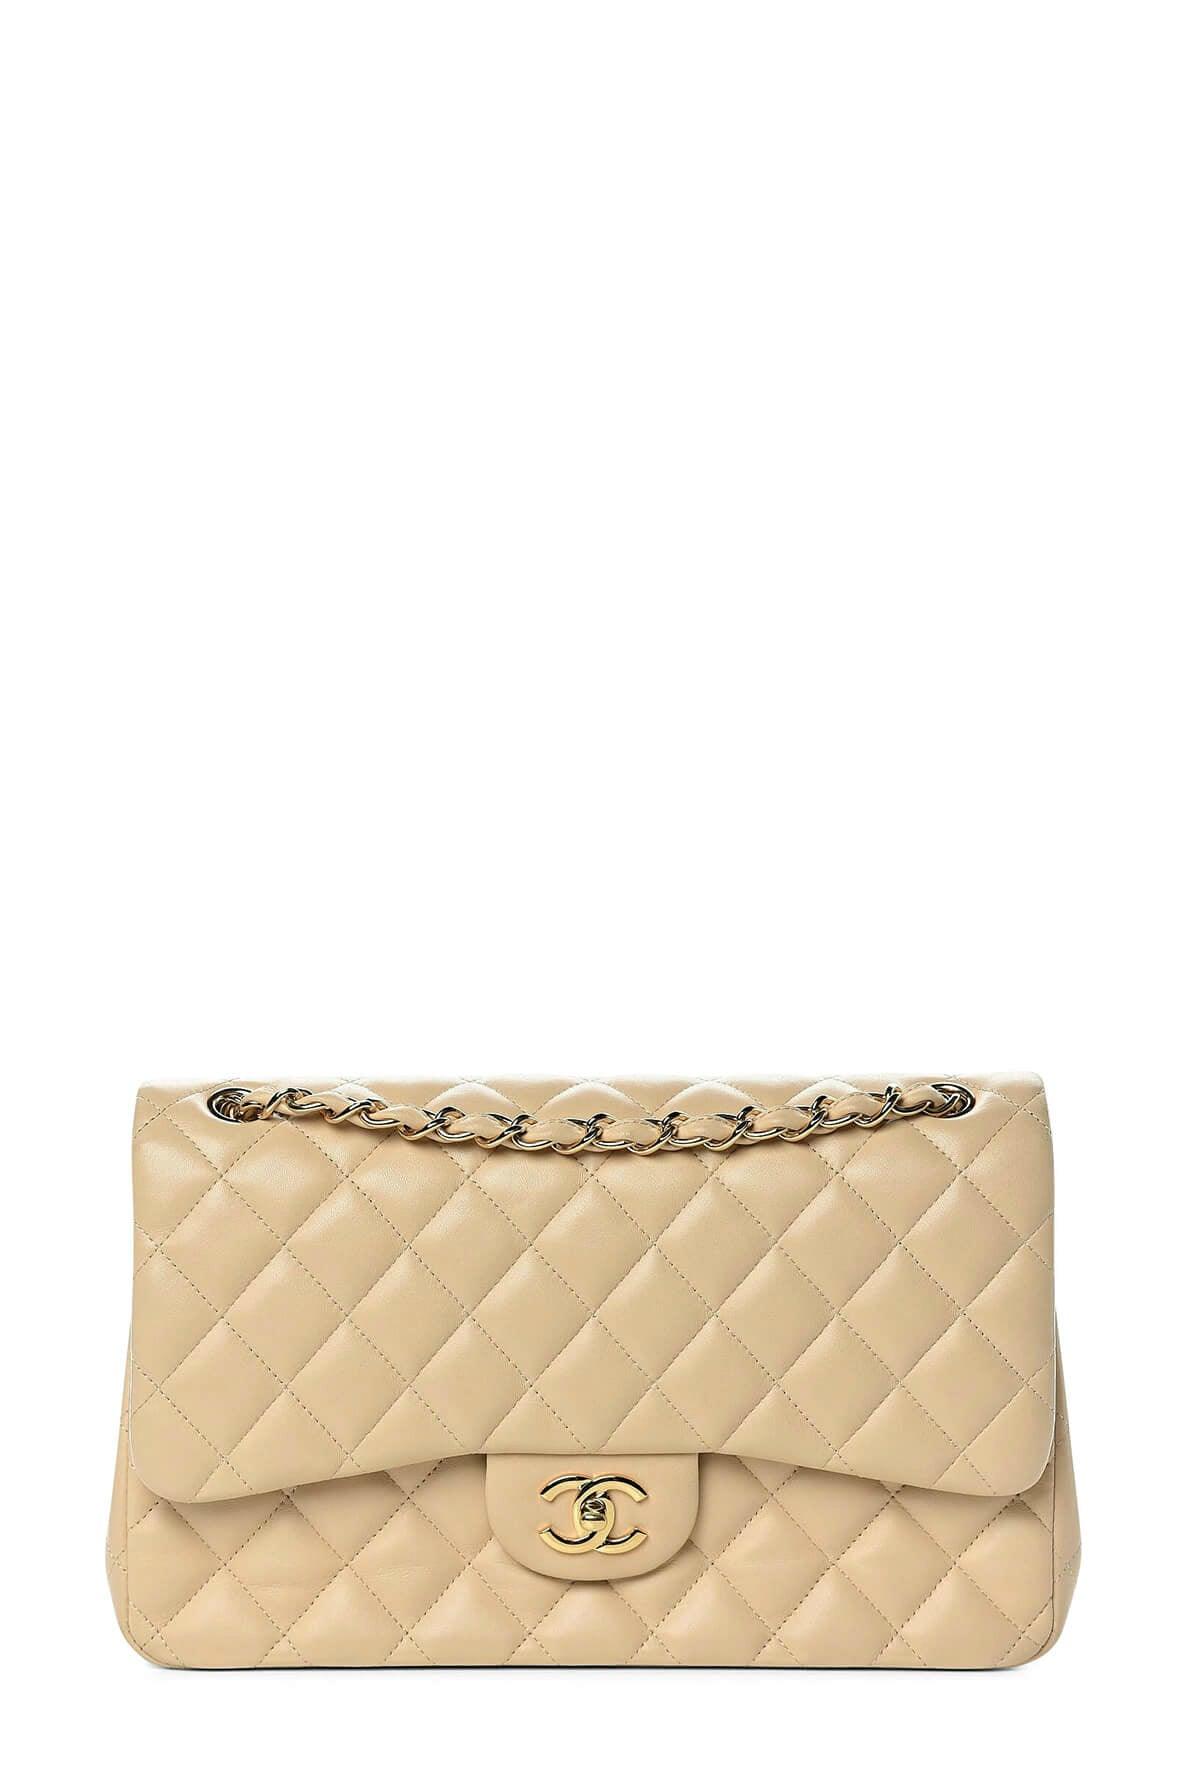 Beige Quilted Lambskin Double Sided Classic Flap Small